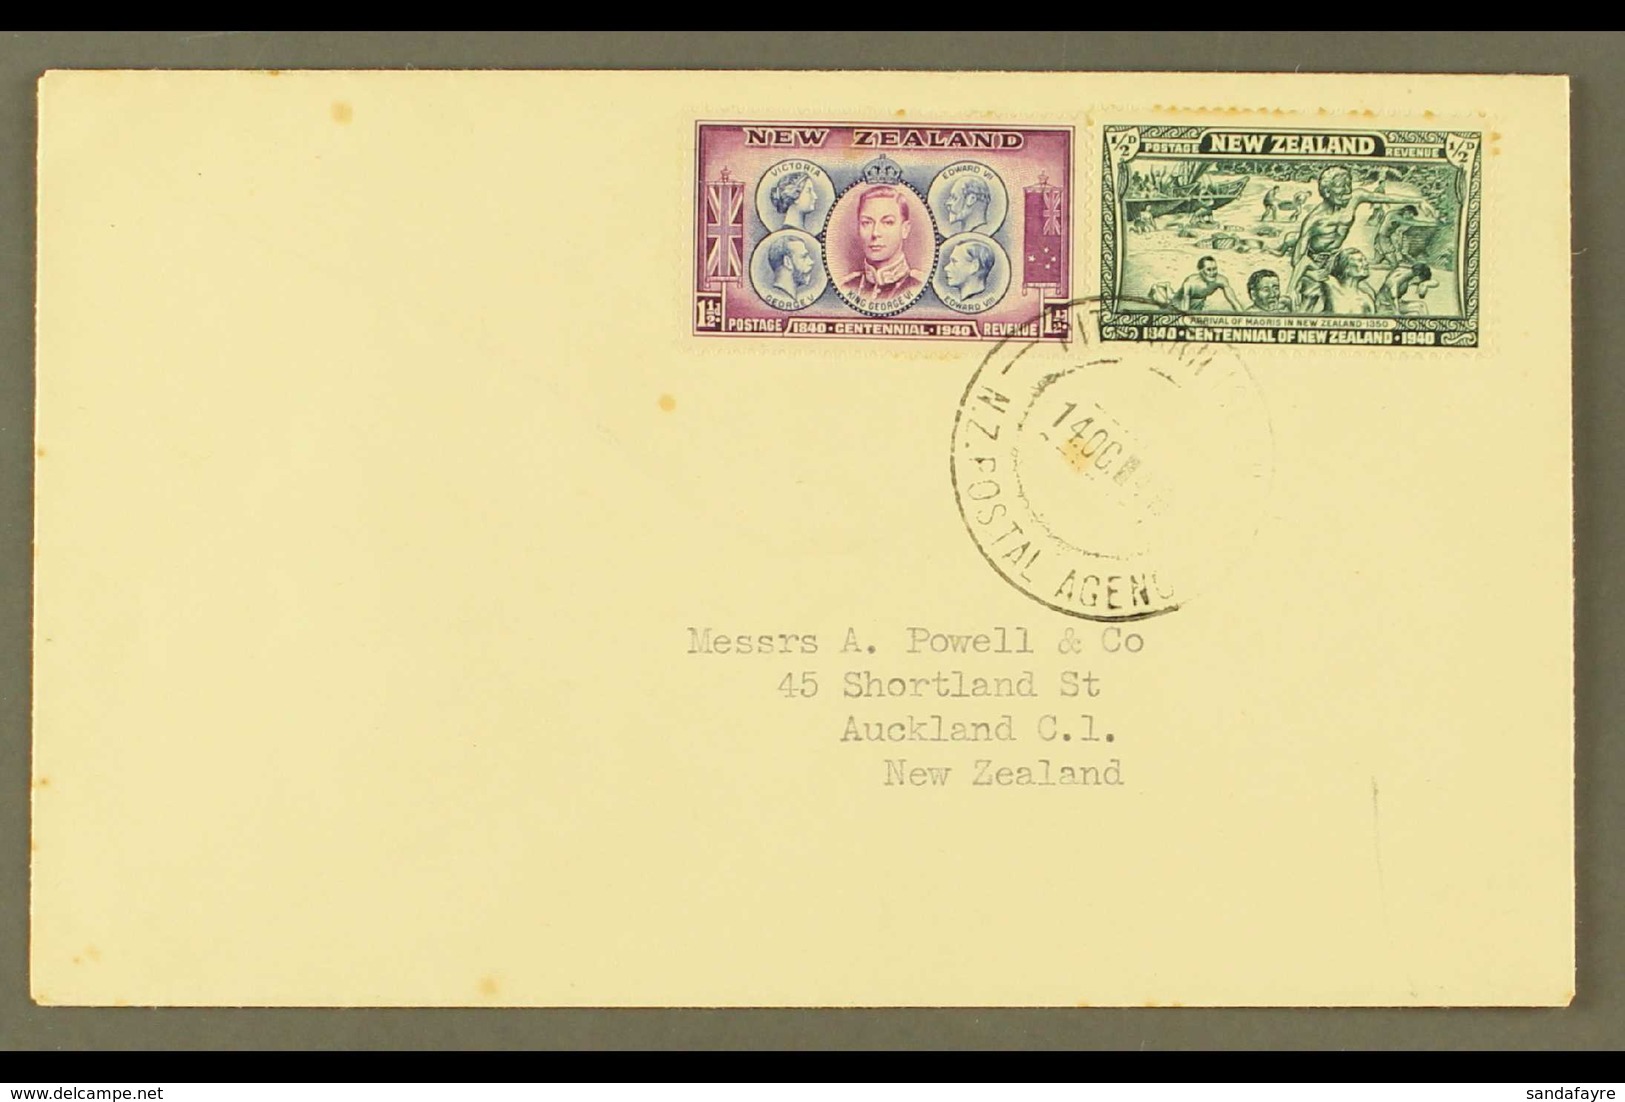 1940 ½d And 1½d Centennial Of New Zealand, On Cover To Auckland Tied By "PITCAIRN ISLAND" Double Ring Cds Cancel Of 14 O - Pitcairn Islands